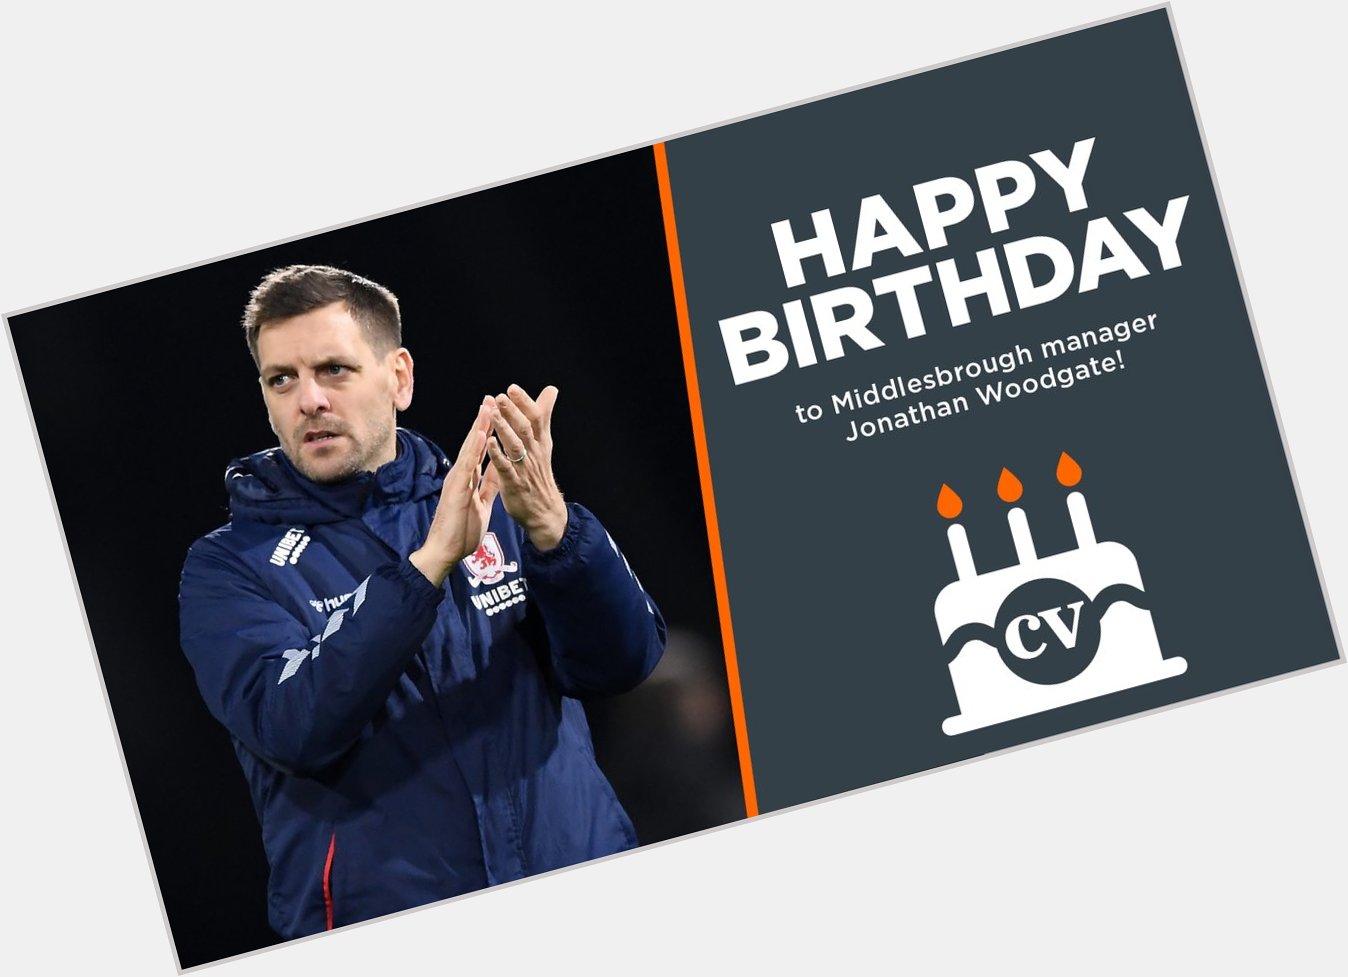  Happy birthday to manager Jonathan Woodgate!       